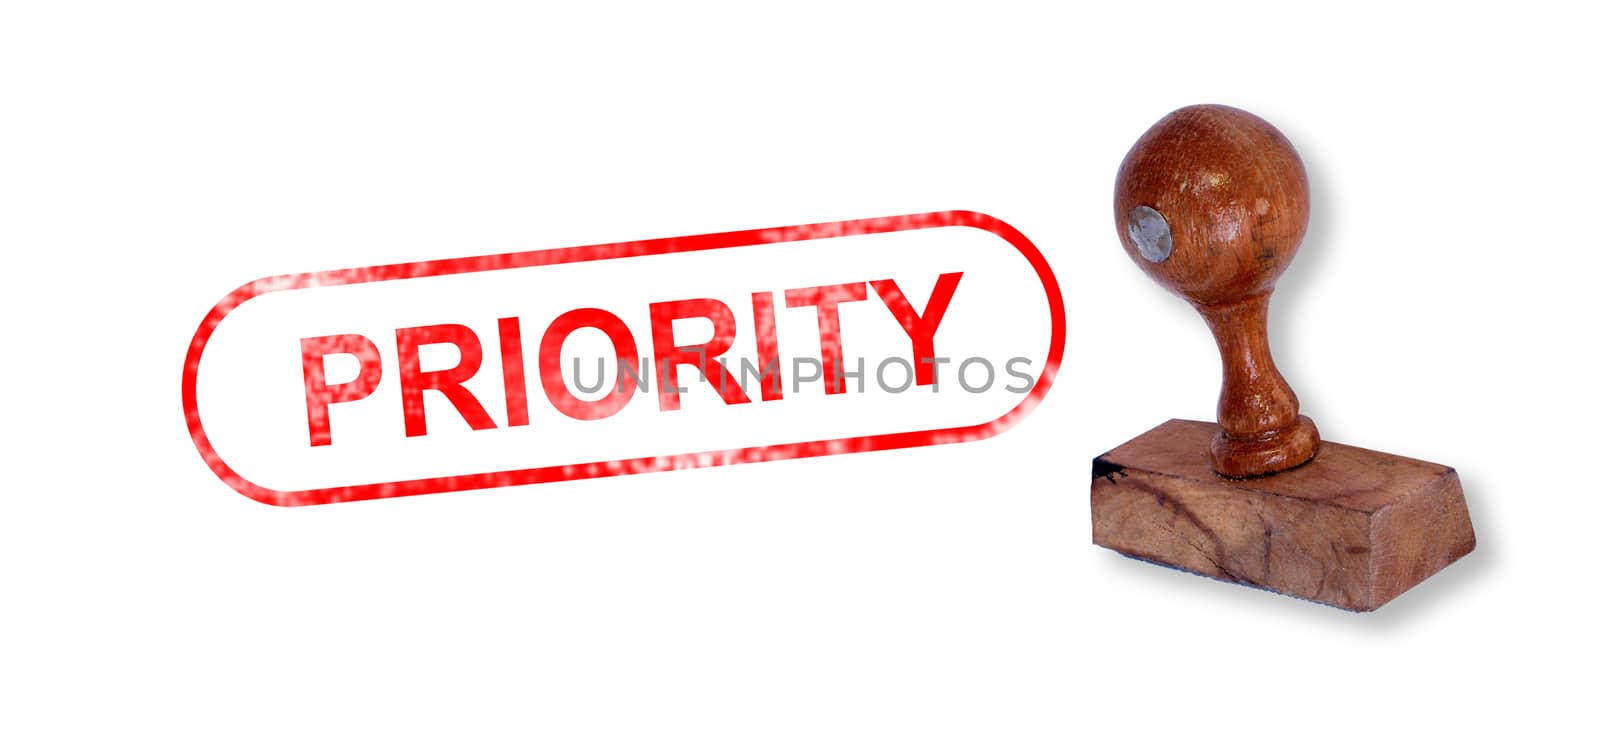 Top view of a rubber stamp with a giant word "PRIORITY" printed, isolated on white background.